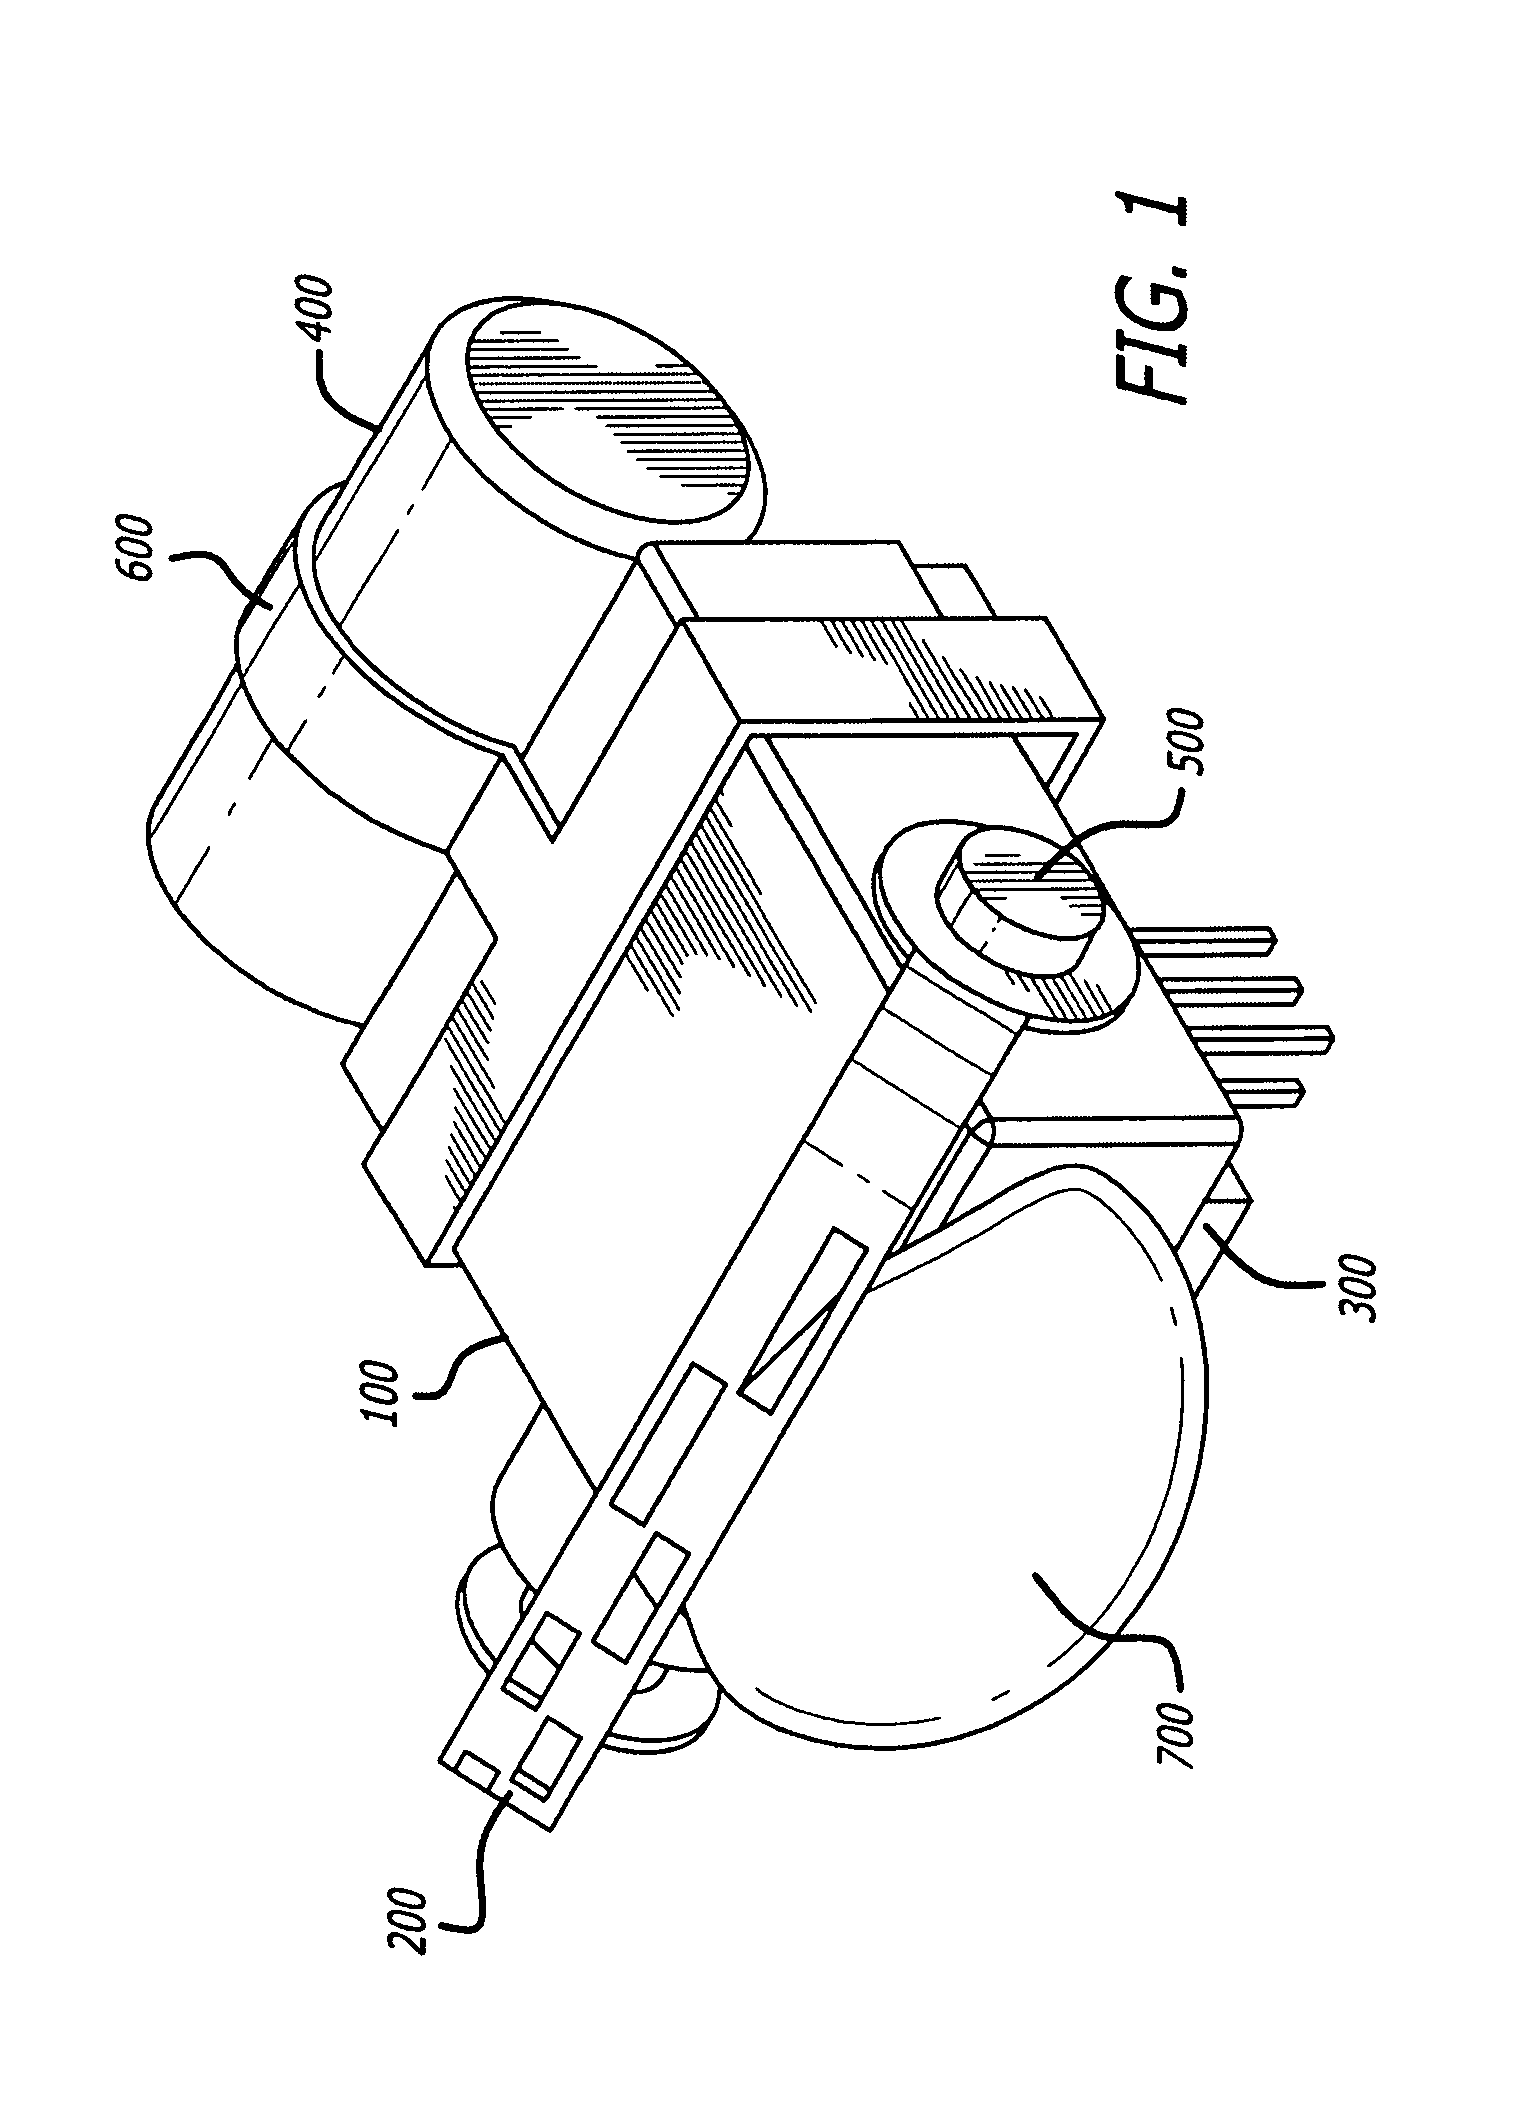 Blink actuation mechanism for a prosthetic eye